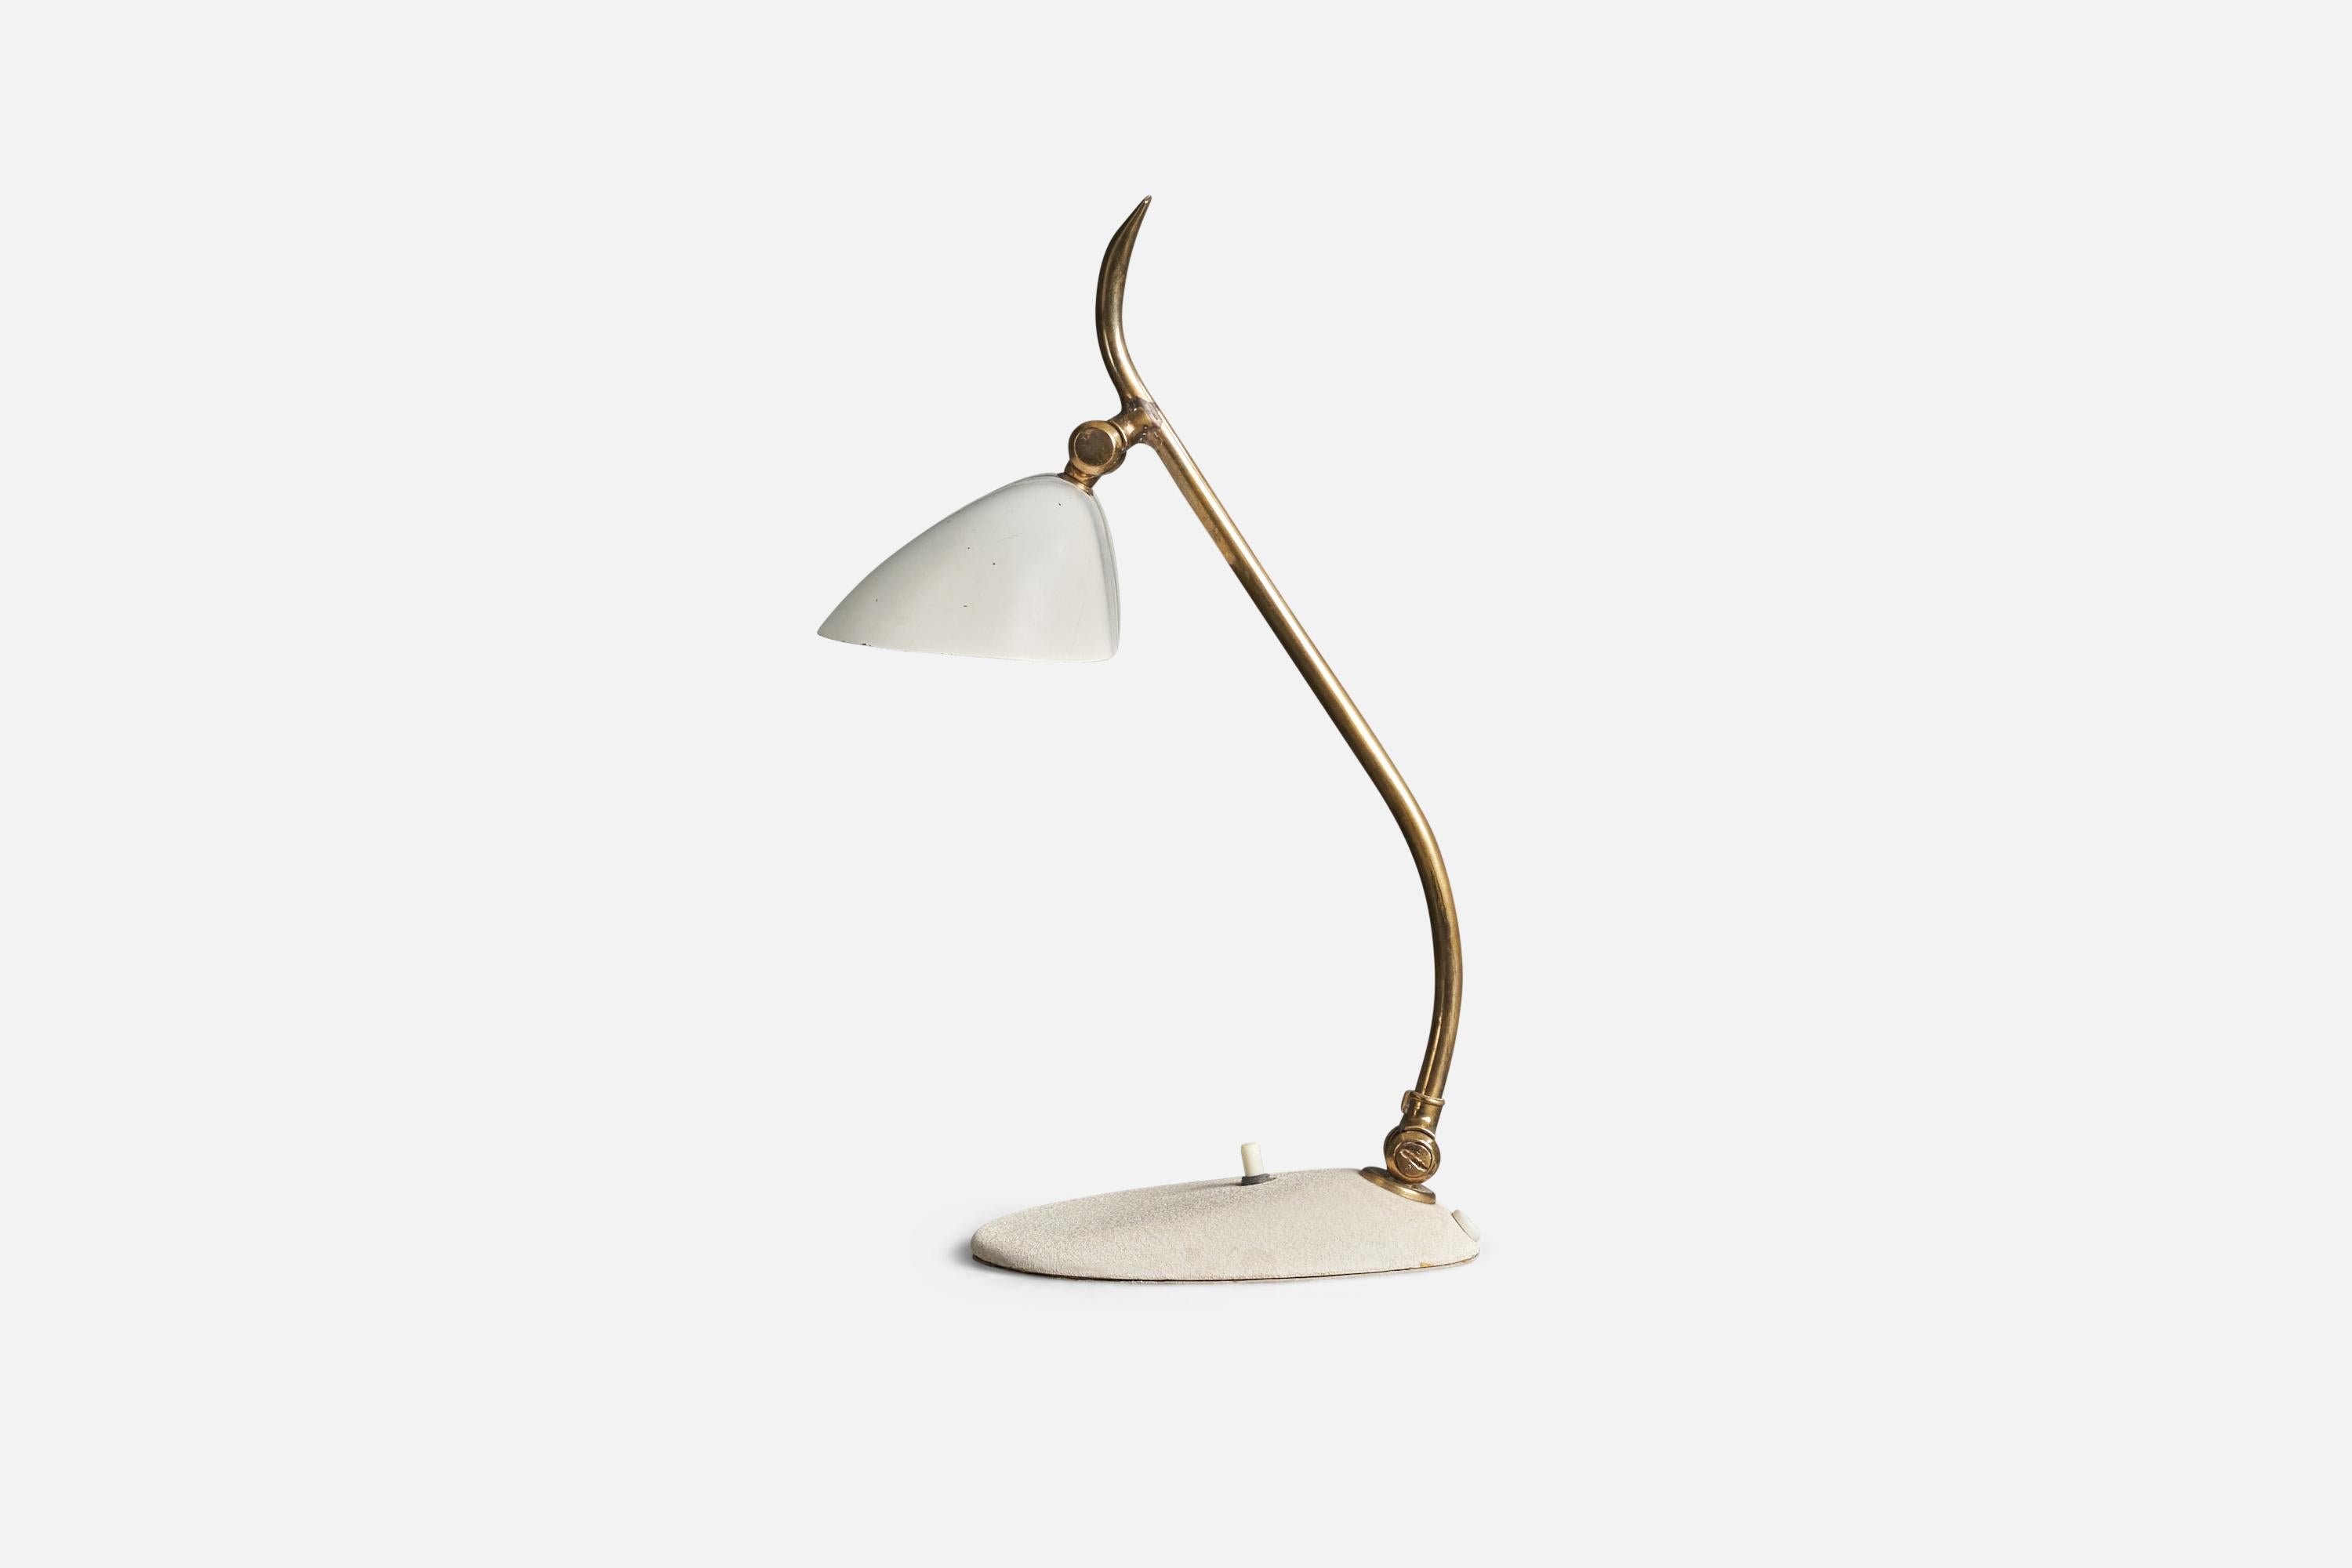 A brass and white-lacquered metal table lamp designed and produced by an Italian Designer, Italy, 1950s.

Dimensions variable, measured as illustrated in first image.

Socket takes E-14 bulb.

There is no maximum wattage stated on the fixture.